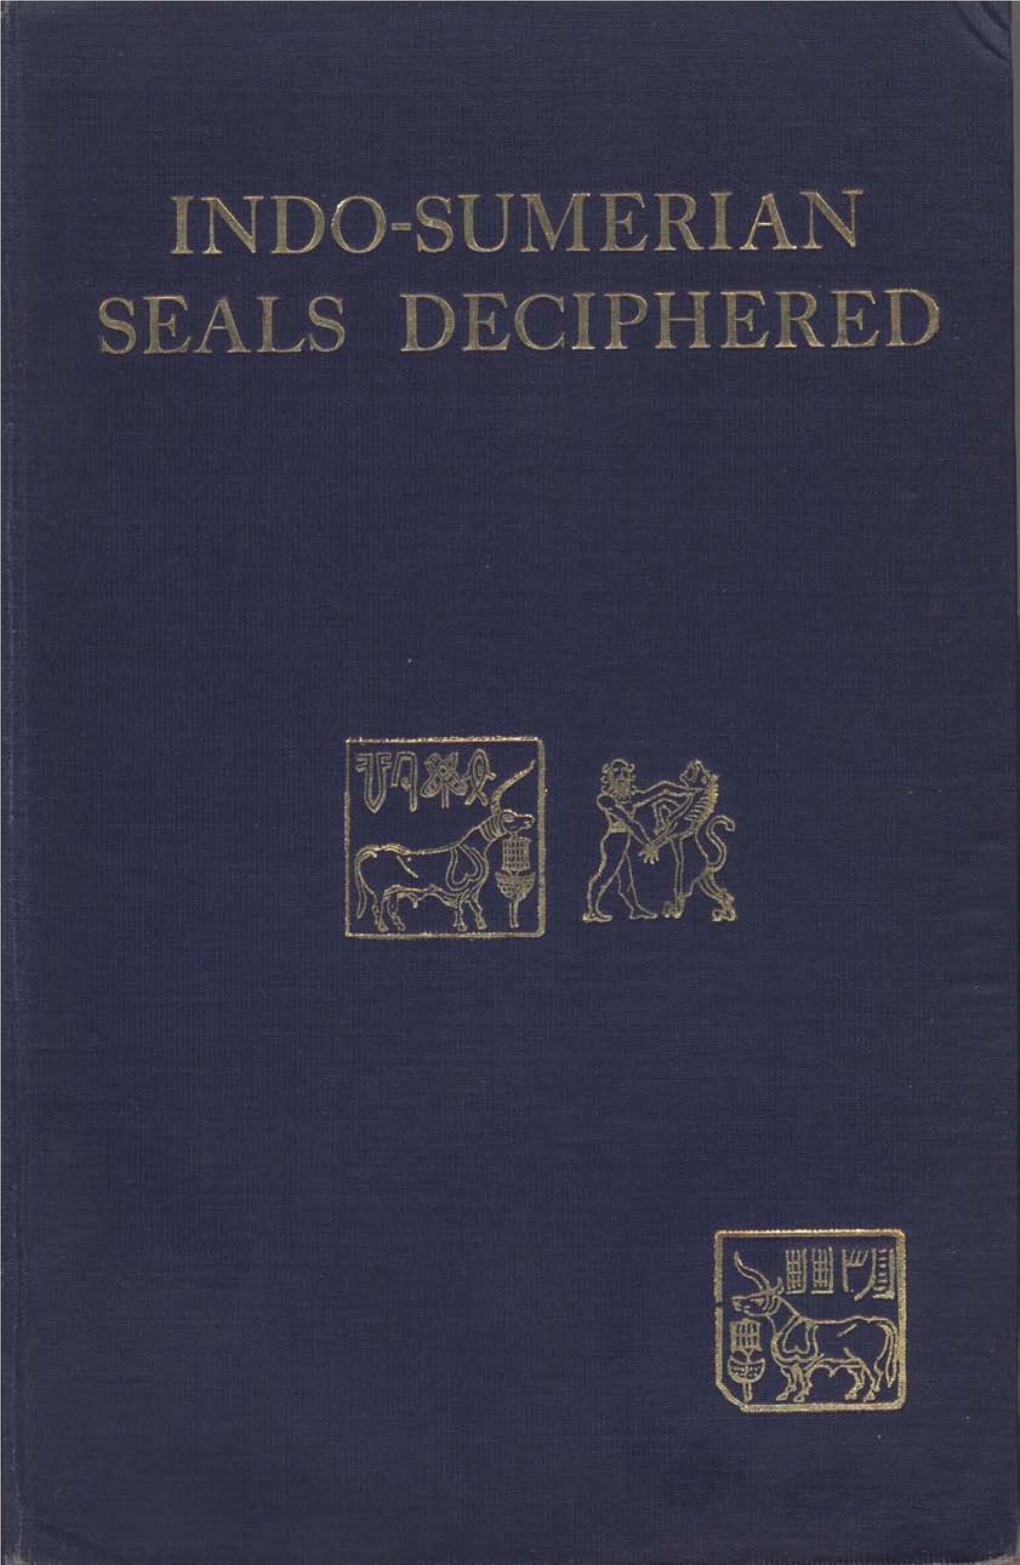 The Indo-Sumerian Seals Deciphered Works by the Same Author